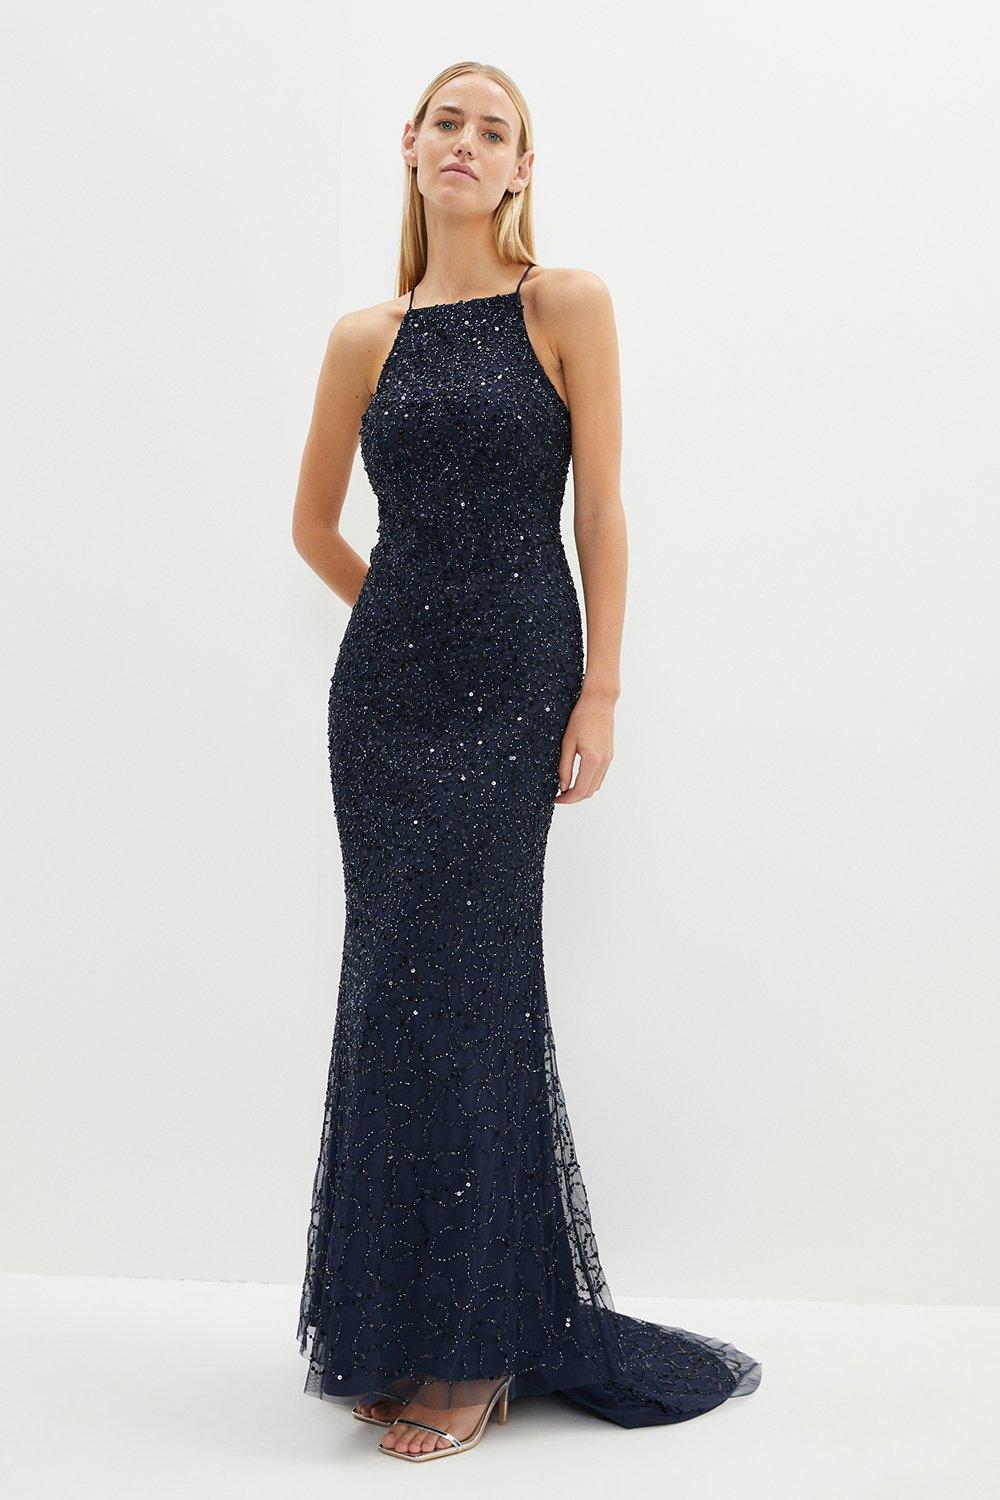 Lace Up Back Sequin Maxi Dress - Navy